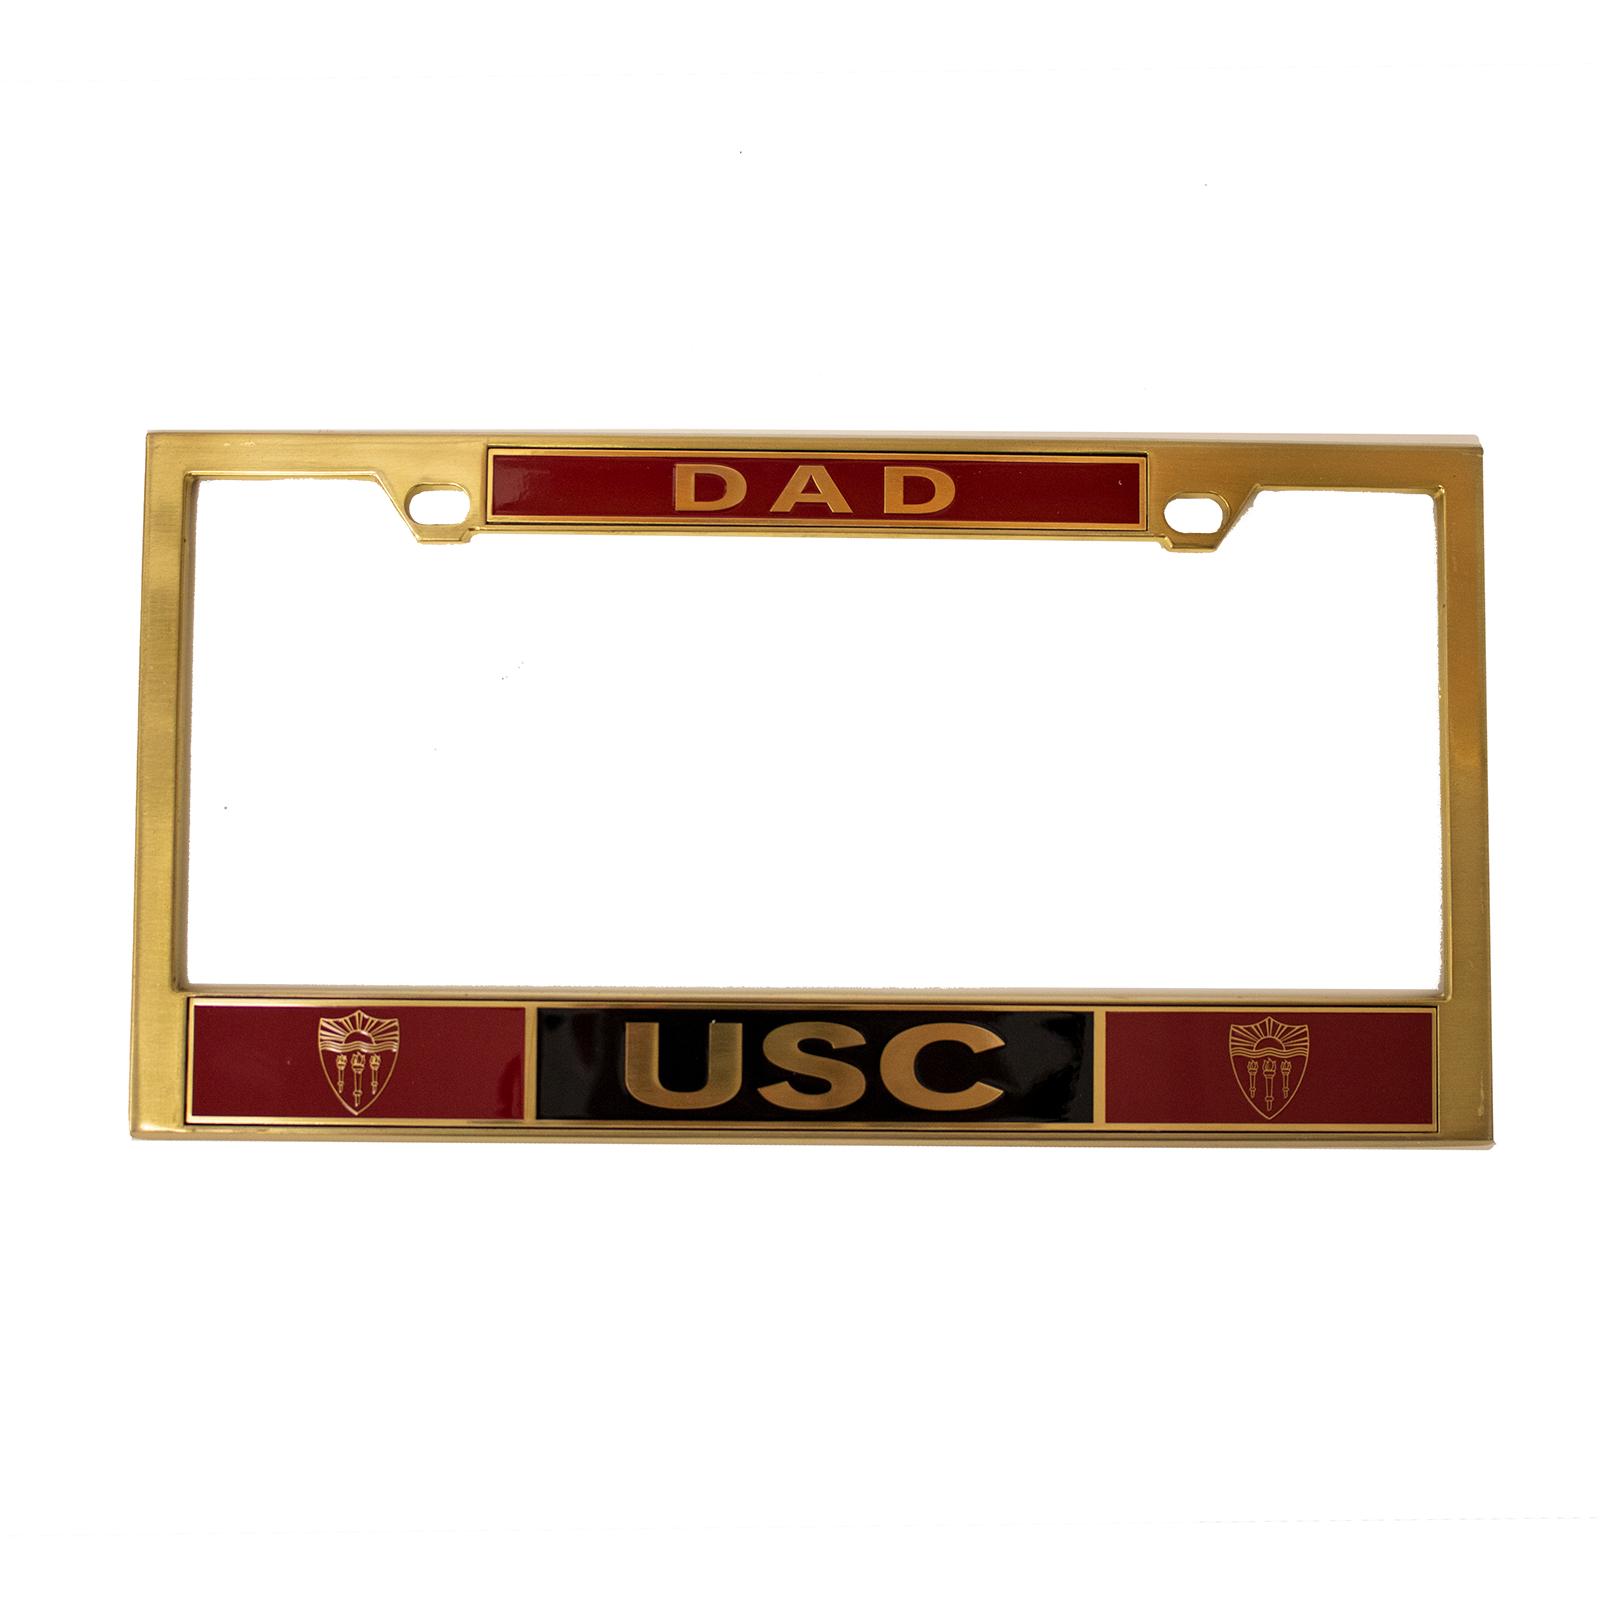 USC Shield Dad License Plate Frame Brass by The U Apparel & Gifts image01